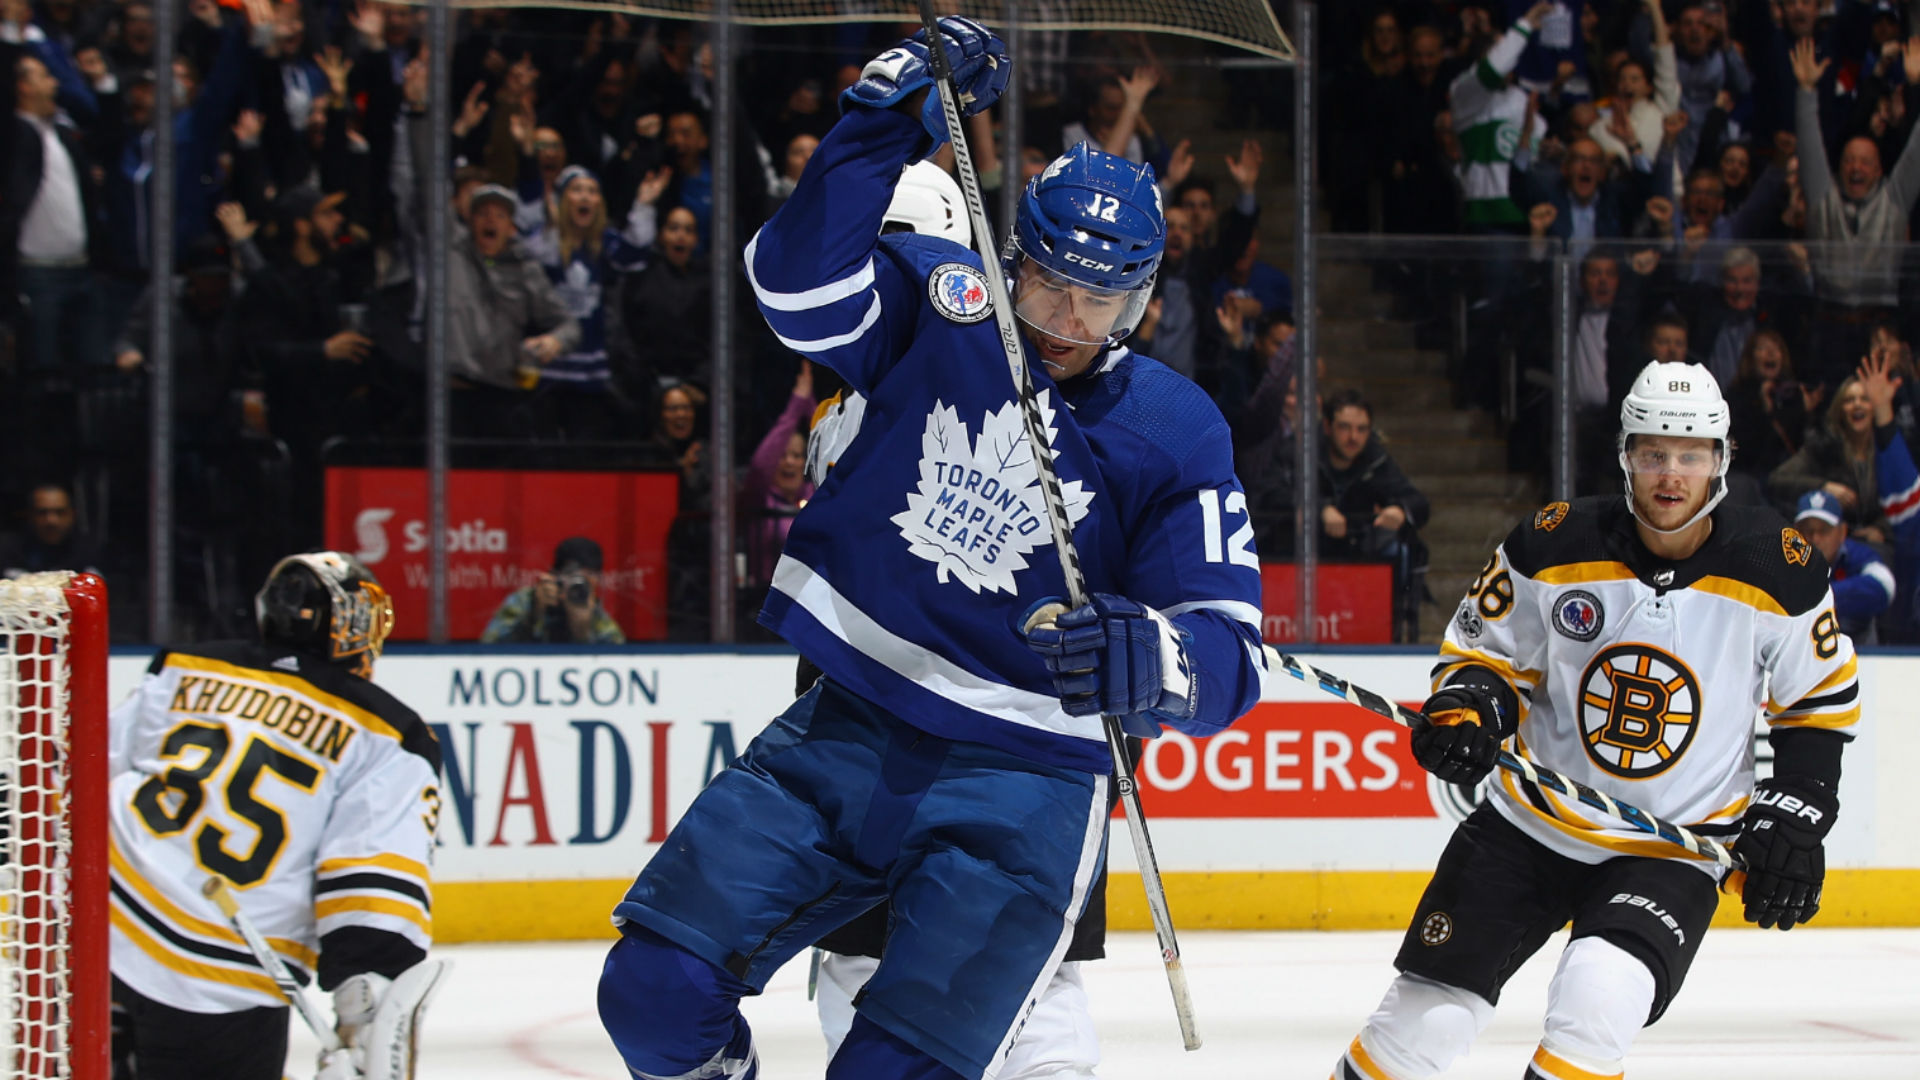 NHL playoffs 2018 Live score, highlights, updates from Maple Leafs vs